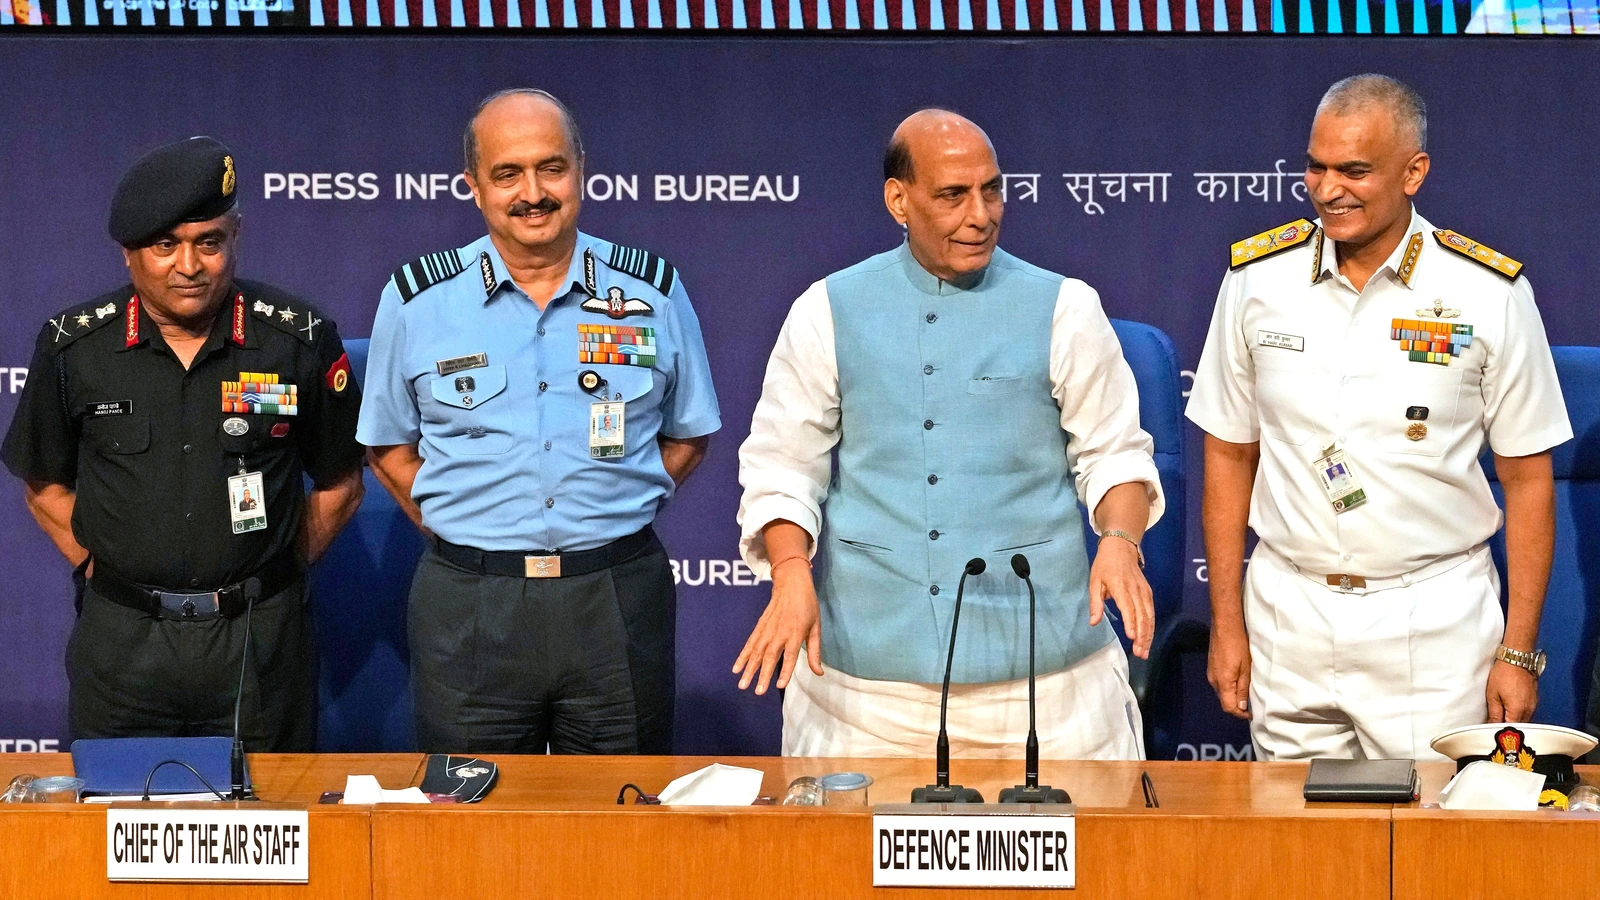 Indian Air Force releases details on Agnipath recruitment: Eligibility, benefits